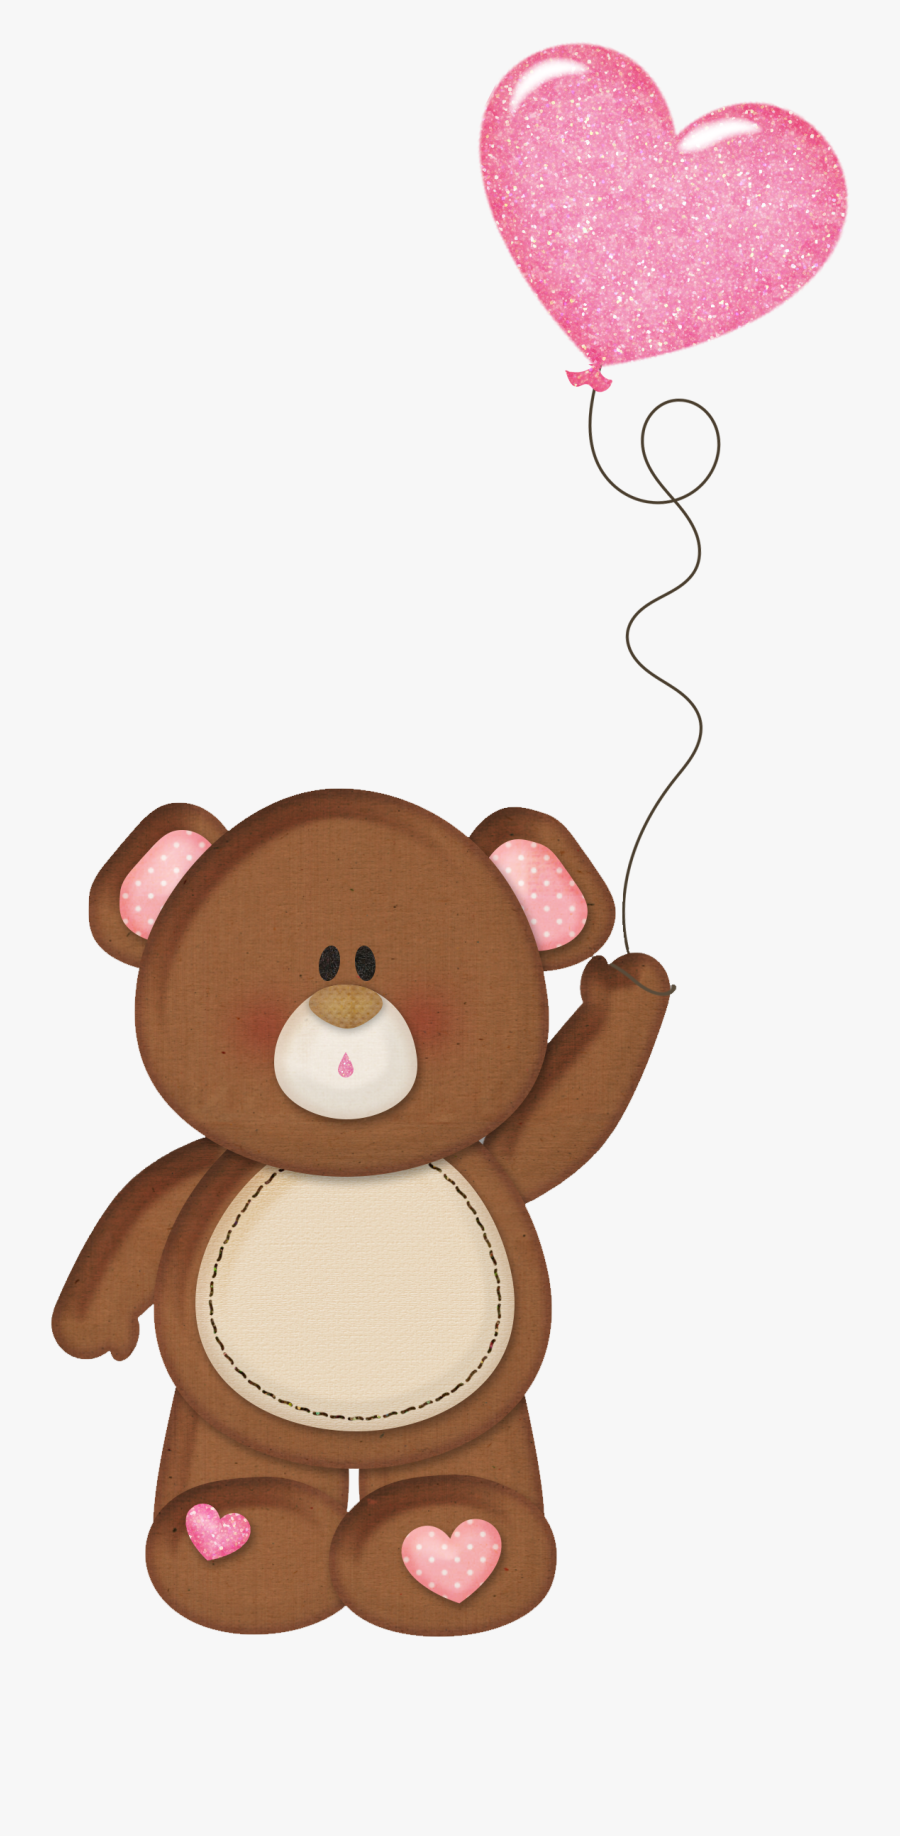 Brown Teddy With Pink Heart Balloon Png Clipart, Transparent Clipart